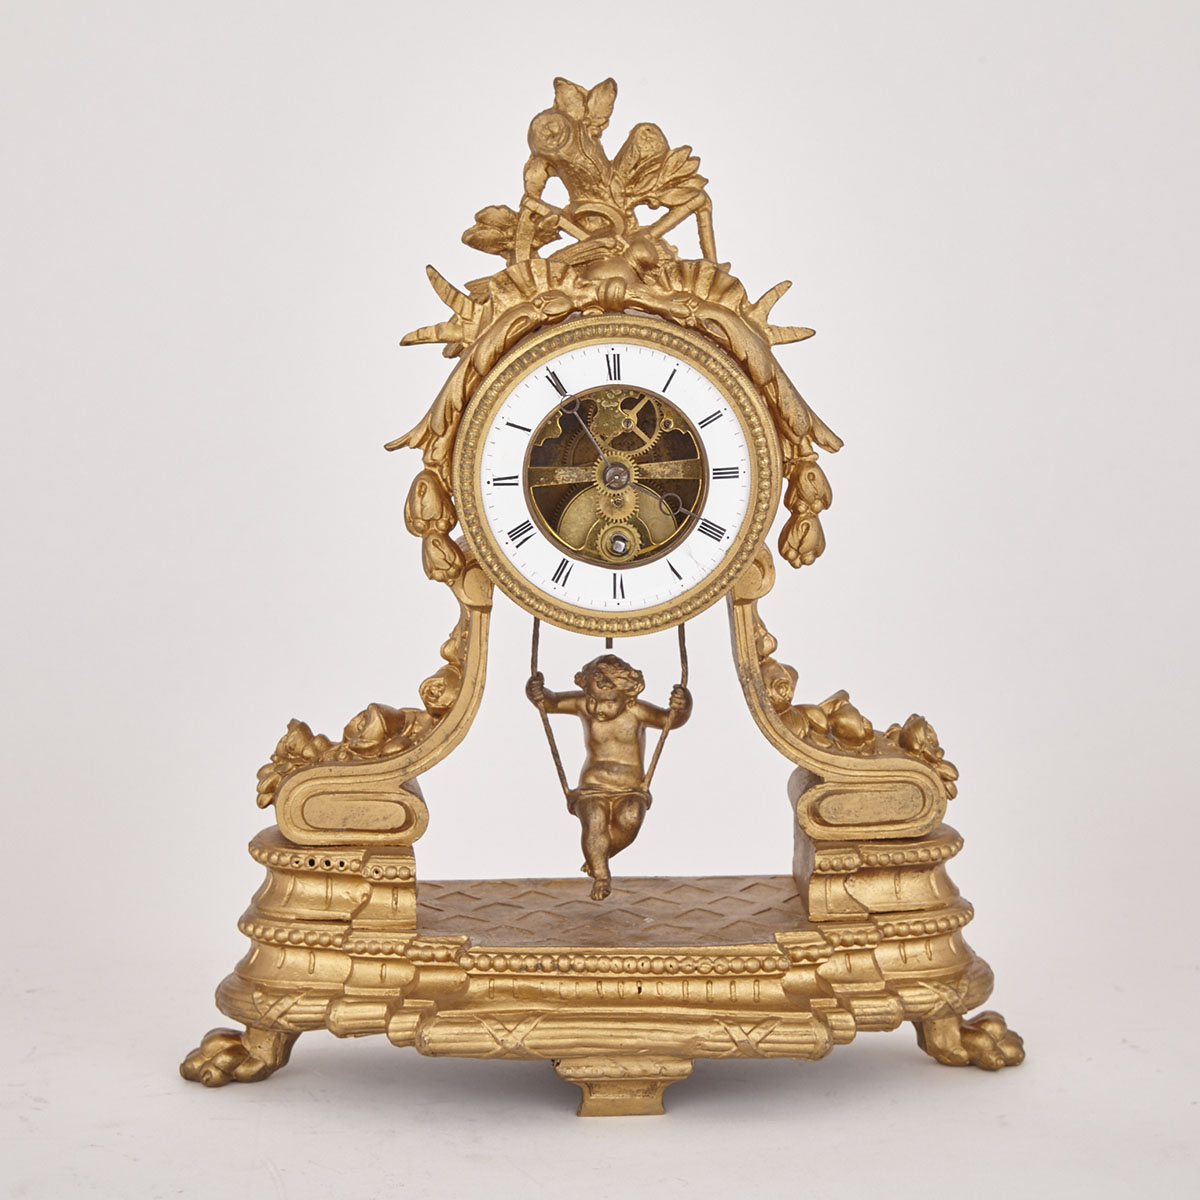 French Gilt Metal Novely Mantel Clock Signed Chappement, late 19th century